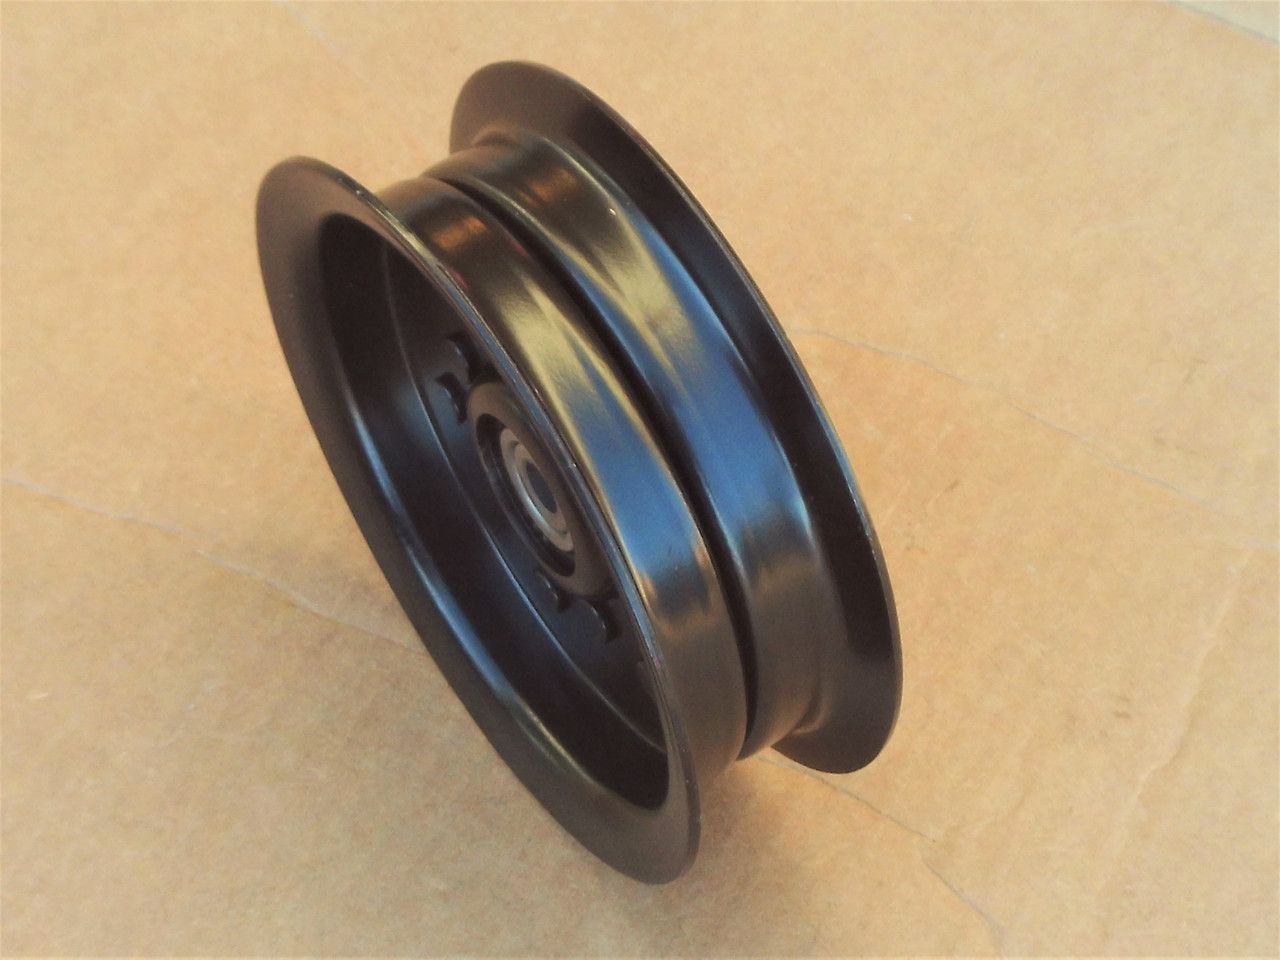 Idler Pulley for Snapper 705114, 709729 Height: 2" ID: 3/8" OD: 5-3/8"